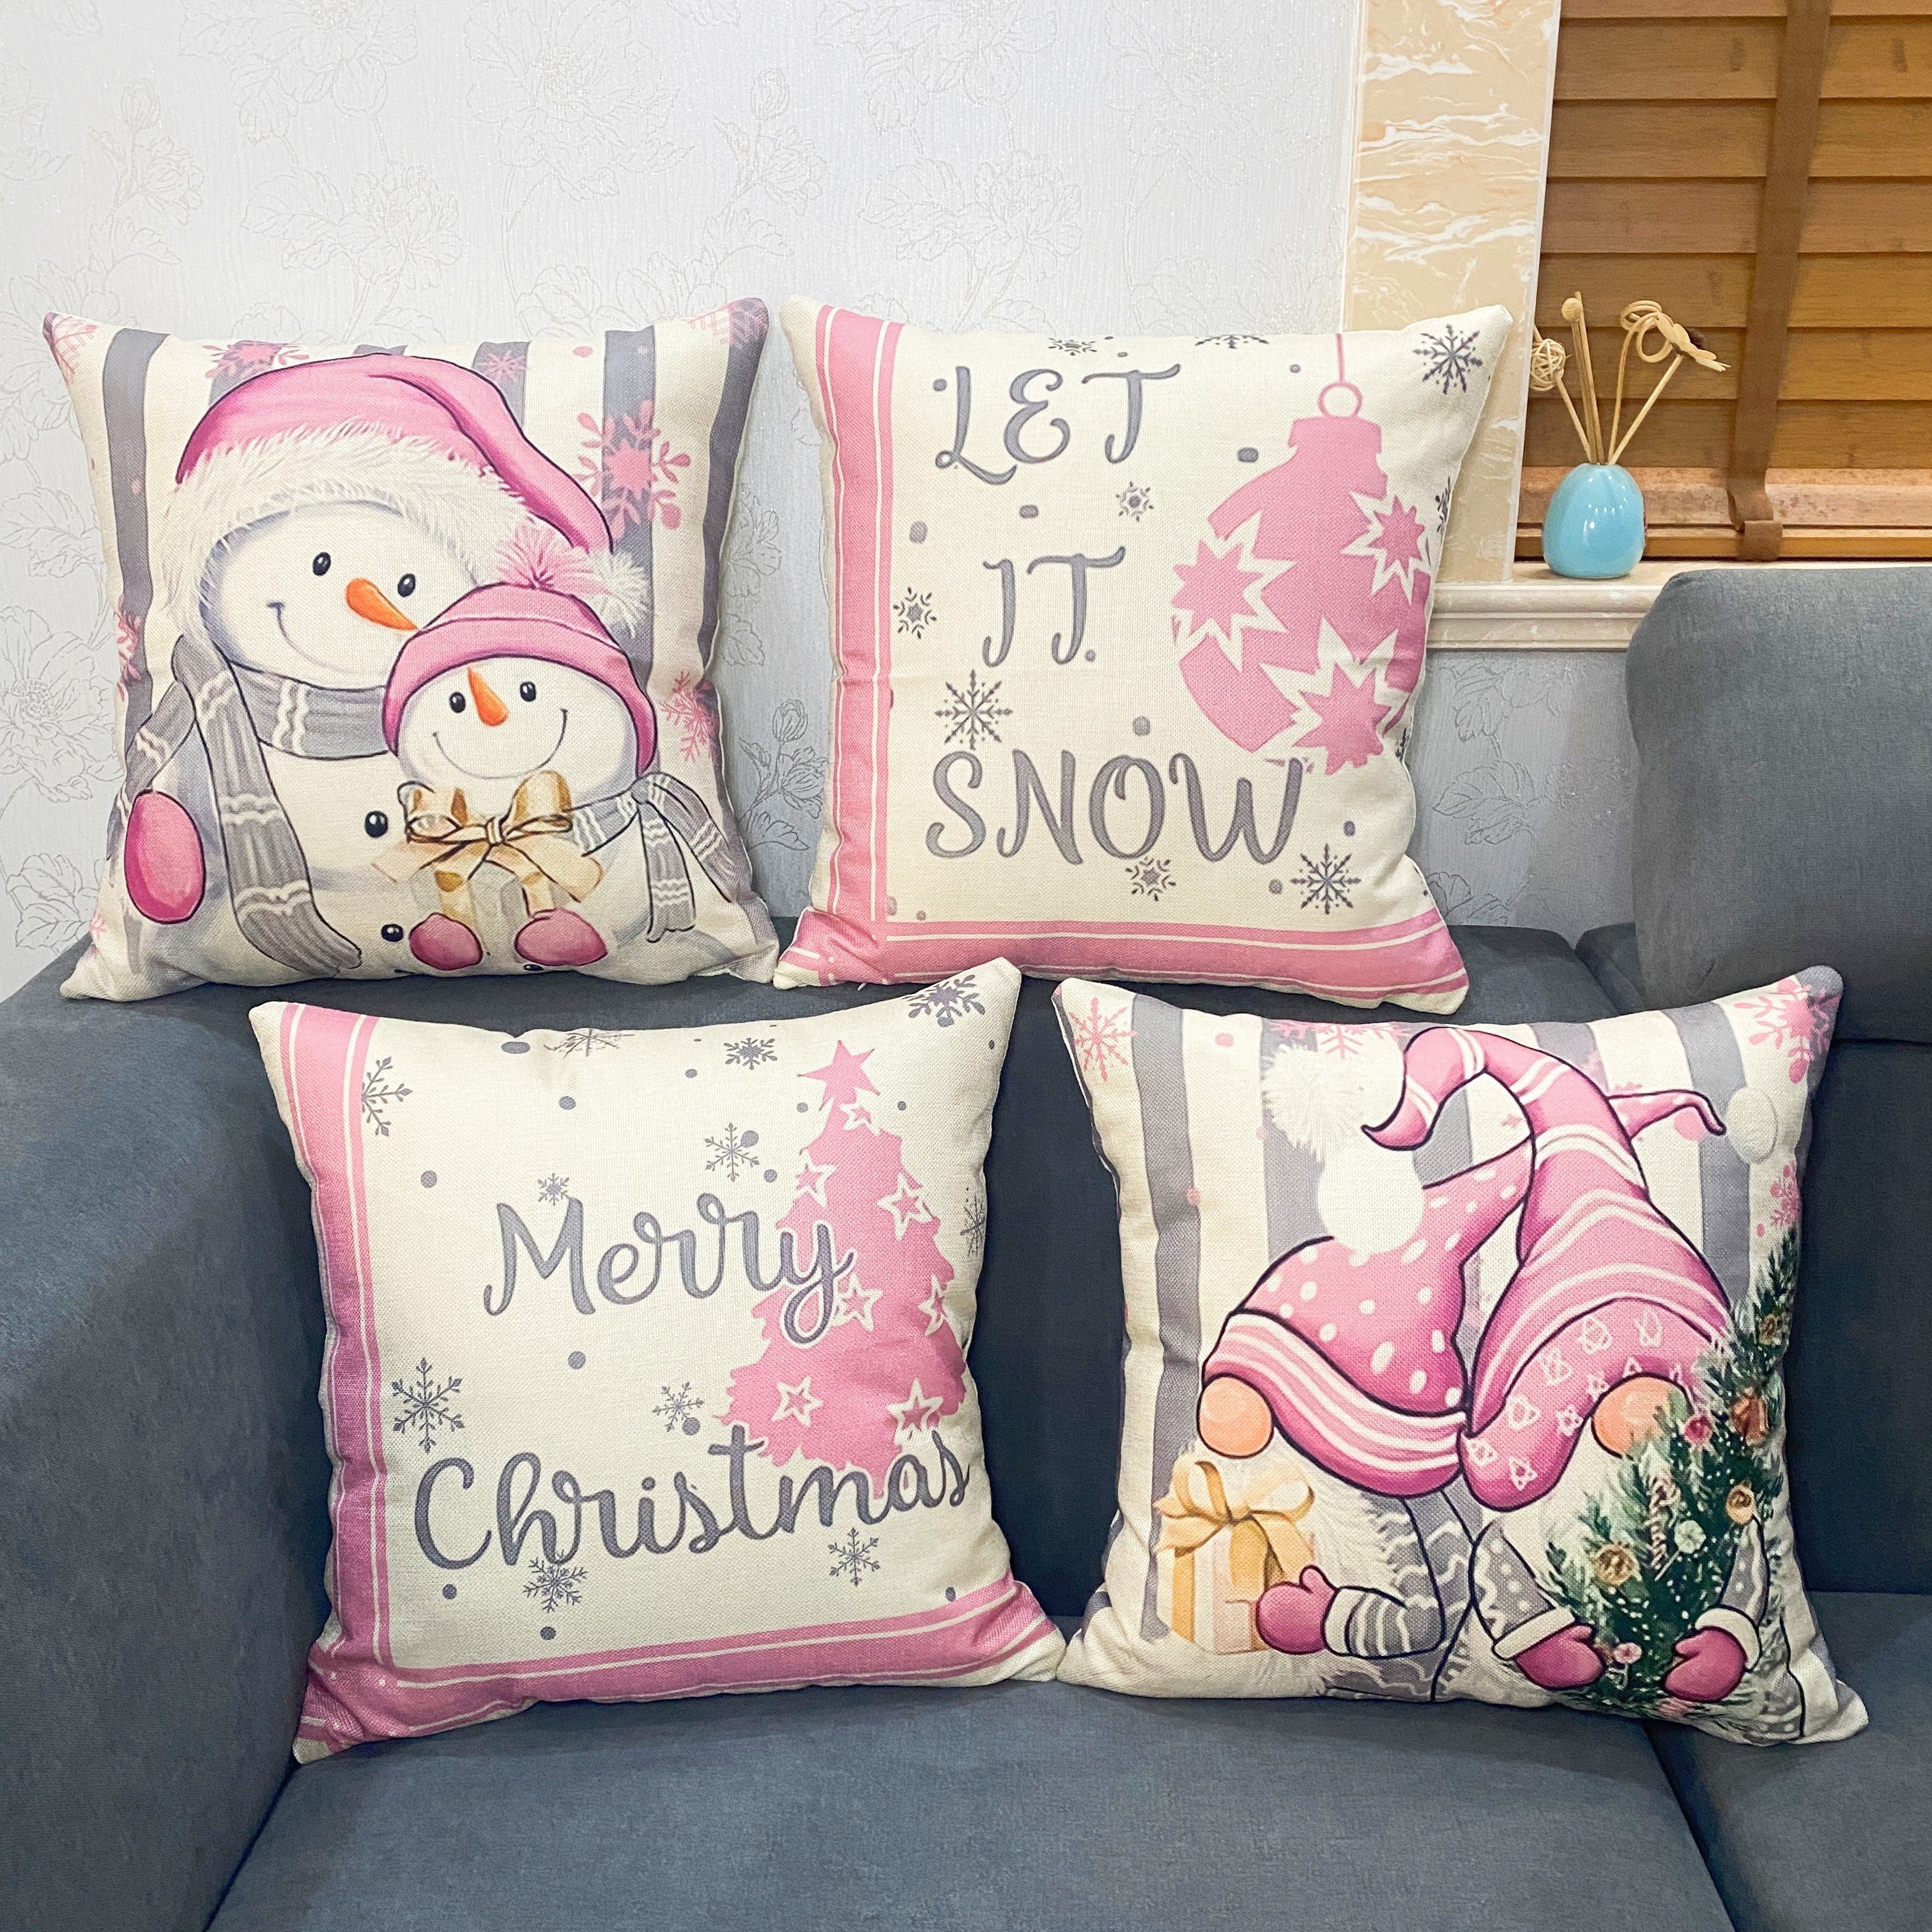 

4pcs Christmas Pink And Grey Santa Claus Christmas Tree Snowman Throw Pillowcase, Throw Pillow Cover For Sofa Bed Car Living Room Home Decor Room Decor, Without Pillow Insert, 17.7inch*17.7inch